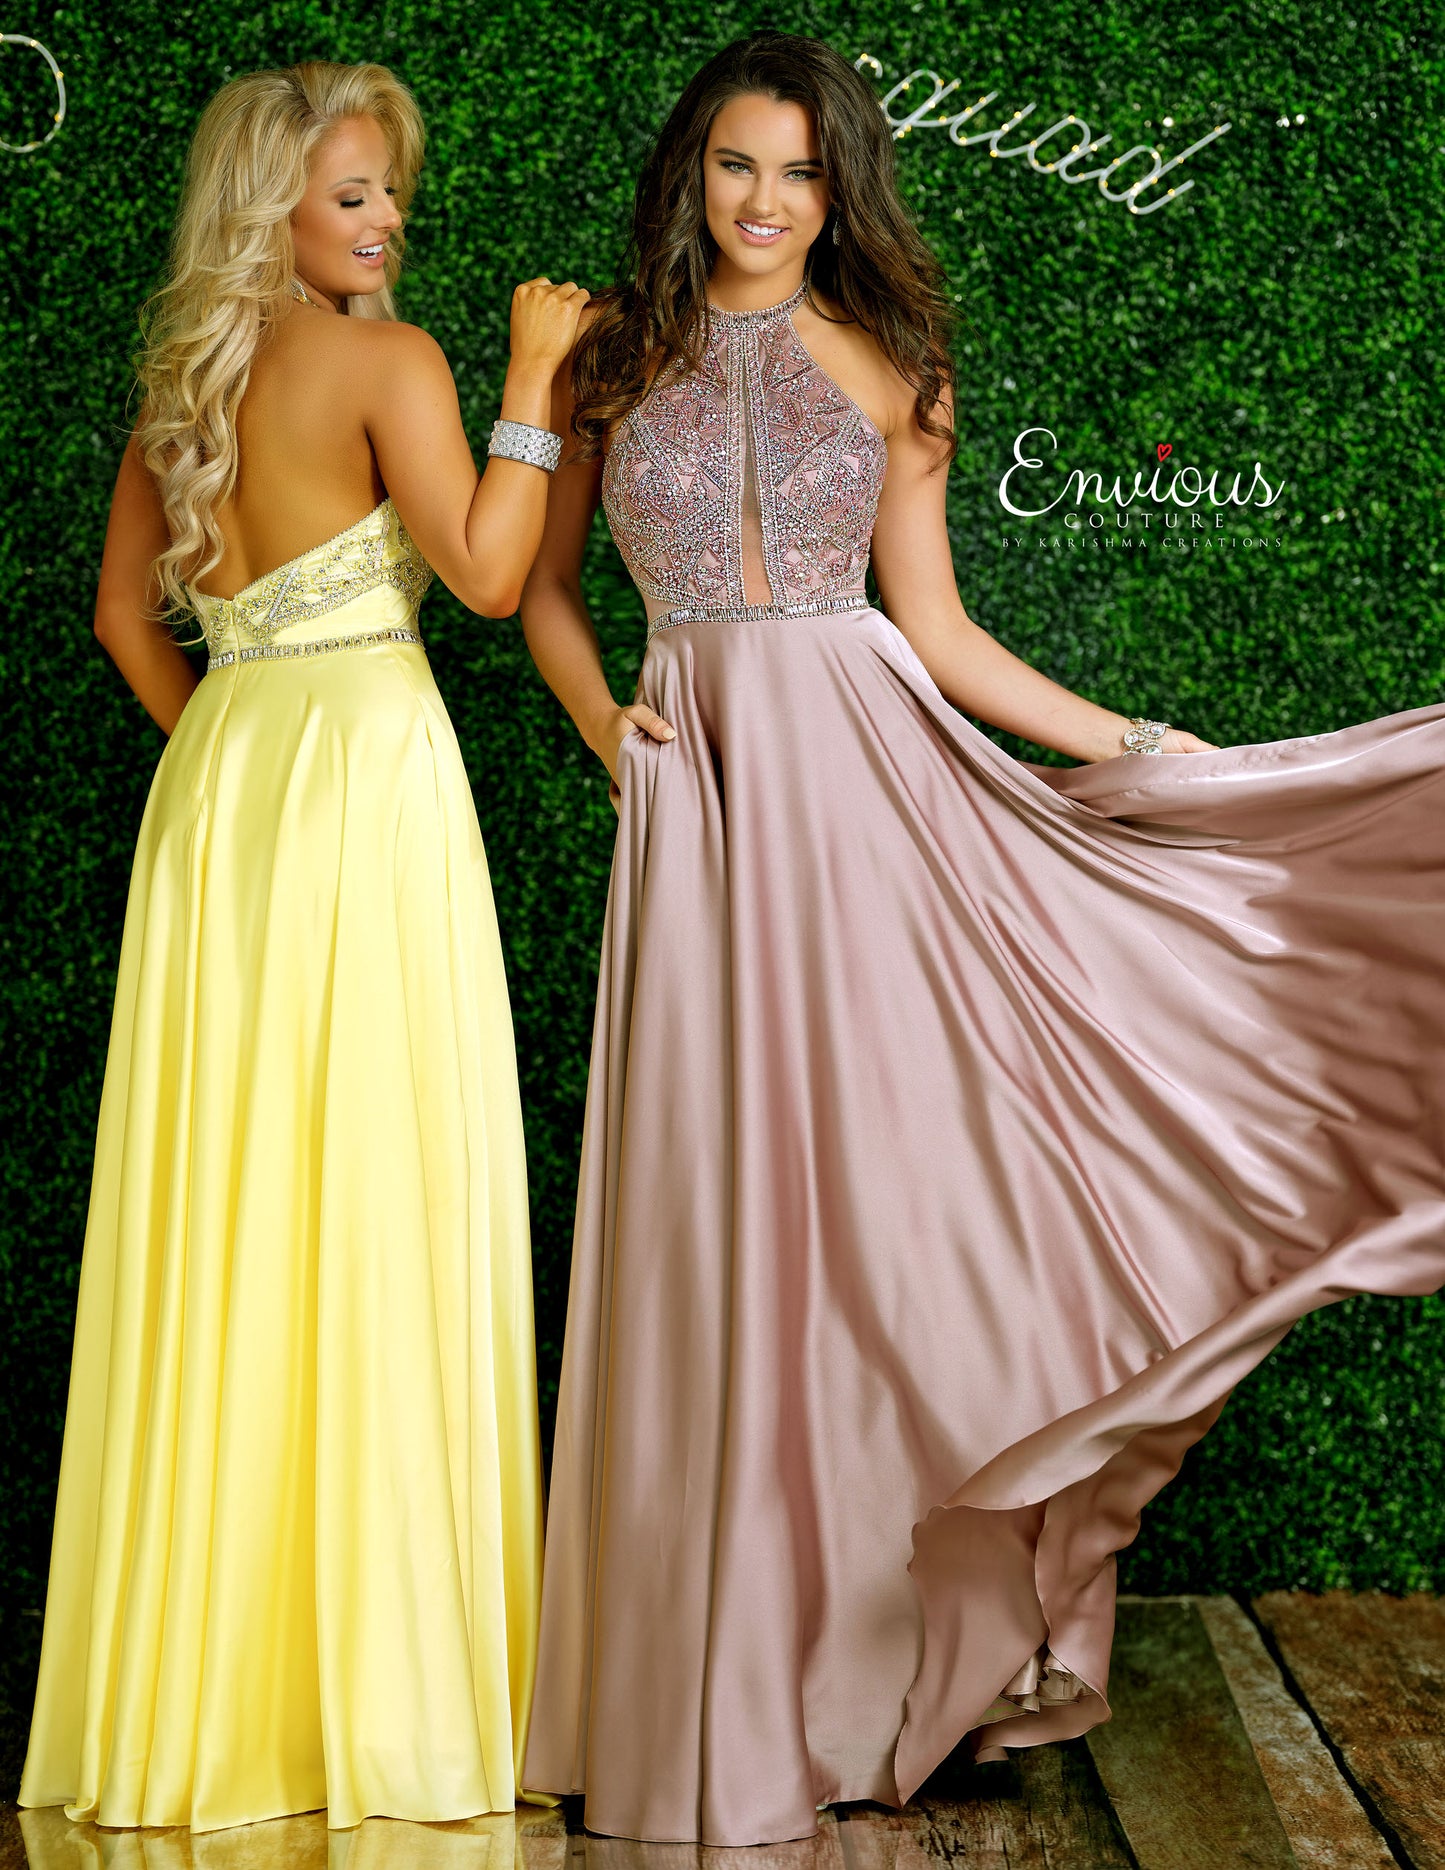 Envious Couture E1404 Karishma Creations is a Long satin A line Prom Dress. High Neck Embellished Bodice with sheer plunging cutout flowing into a satin skirt with pockets.   Available Sizes: 4  Colors: Yellow